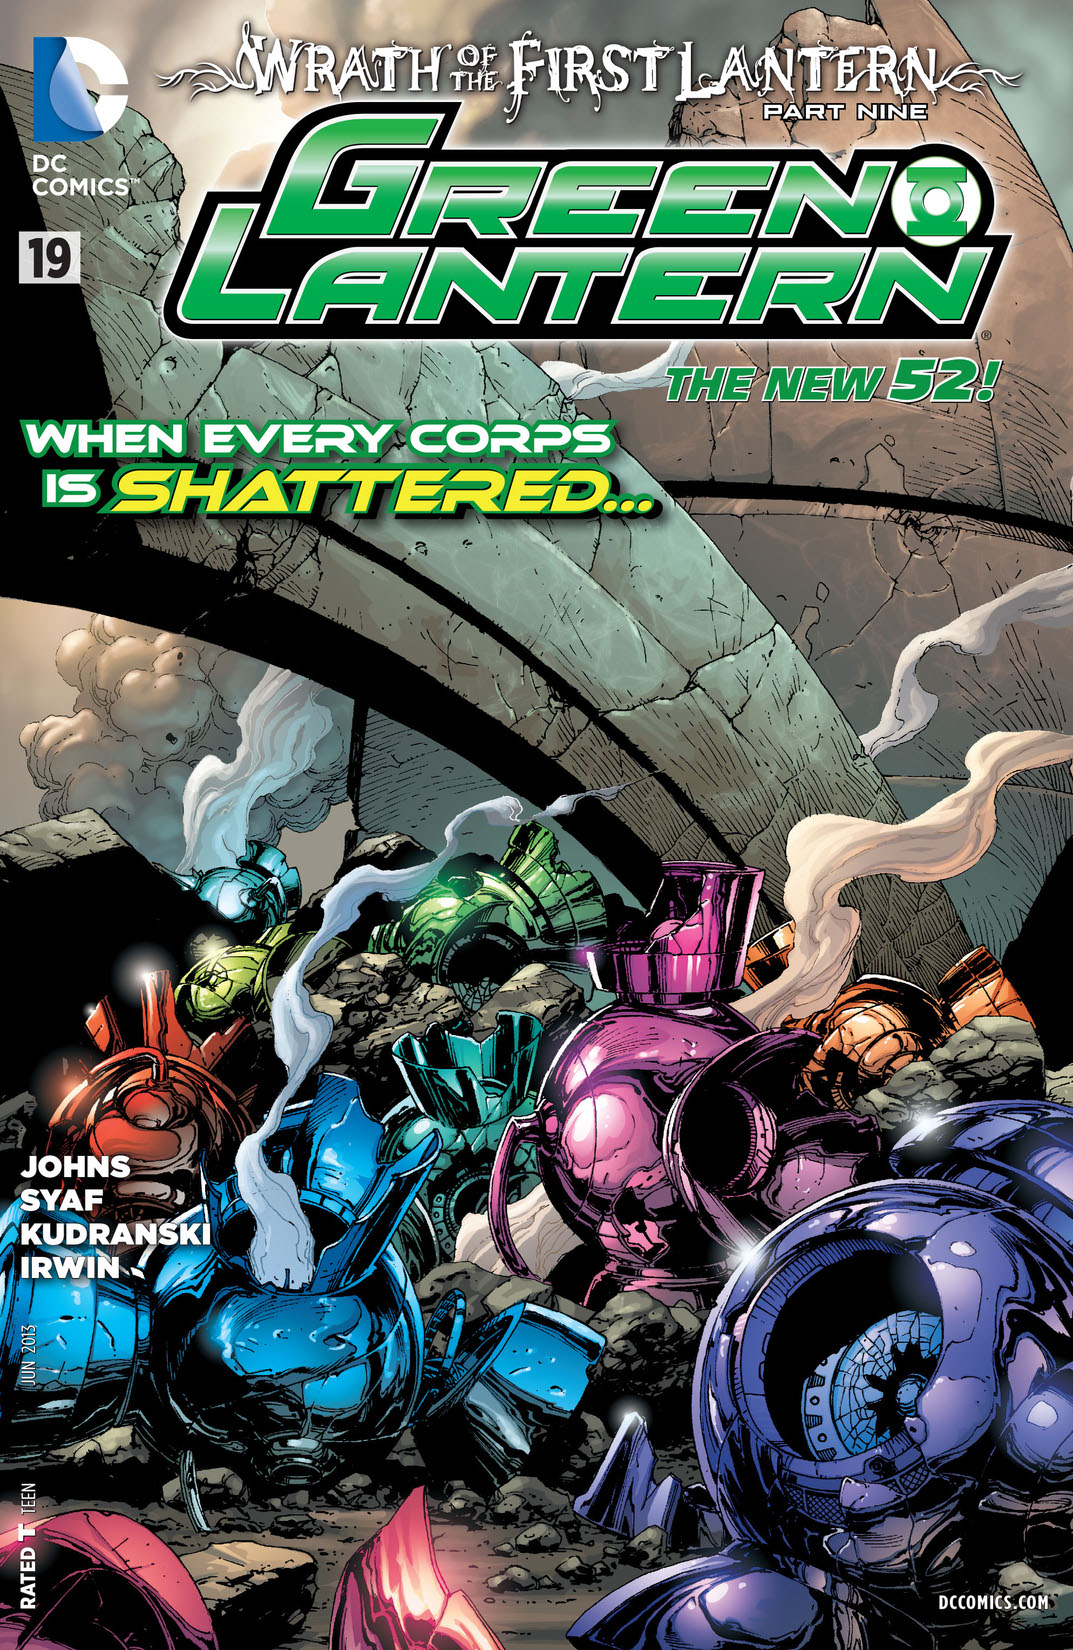 Green Lantern (2011-) #19 preview images